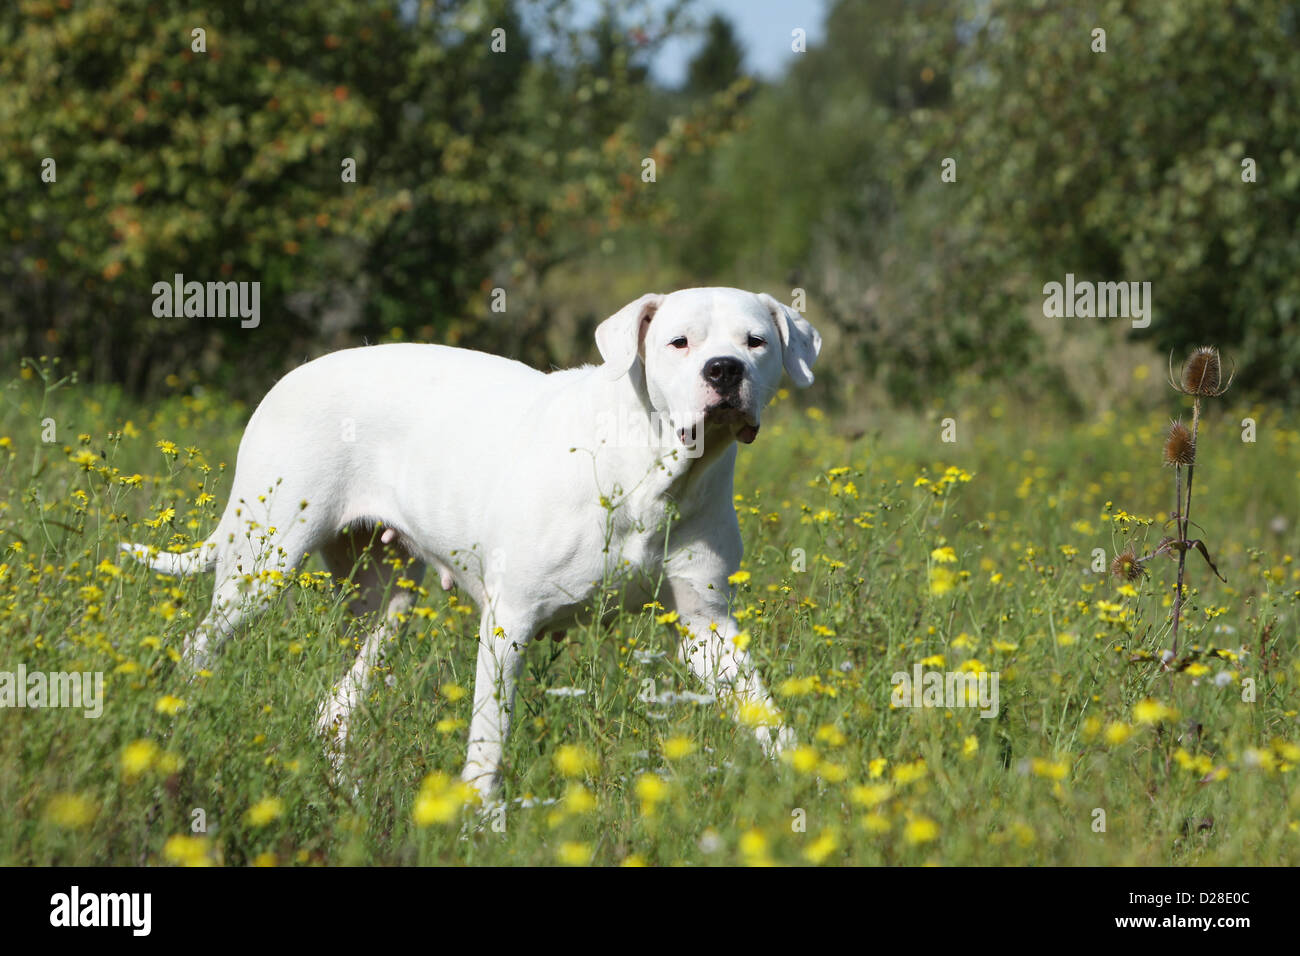 Dog Dogo Argentino / Dogue Argentin (natural ears) adult walking in a meadow Stock Photo